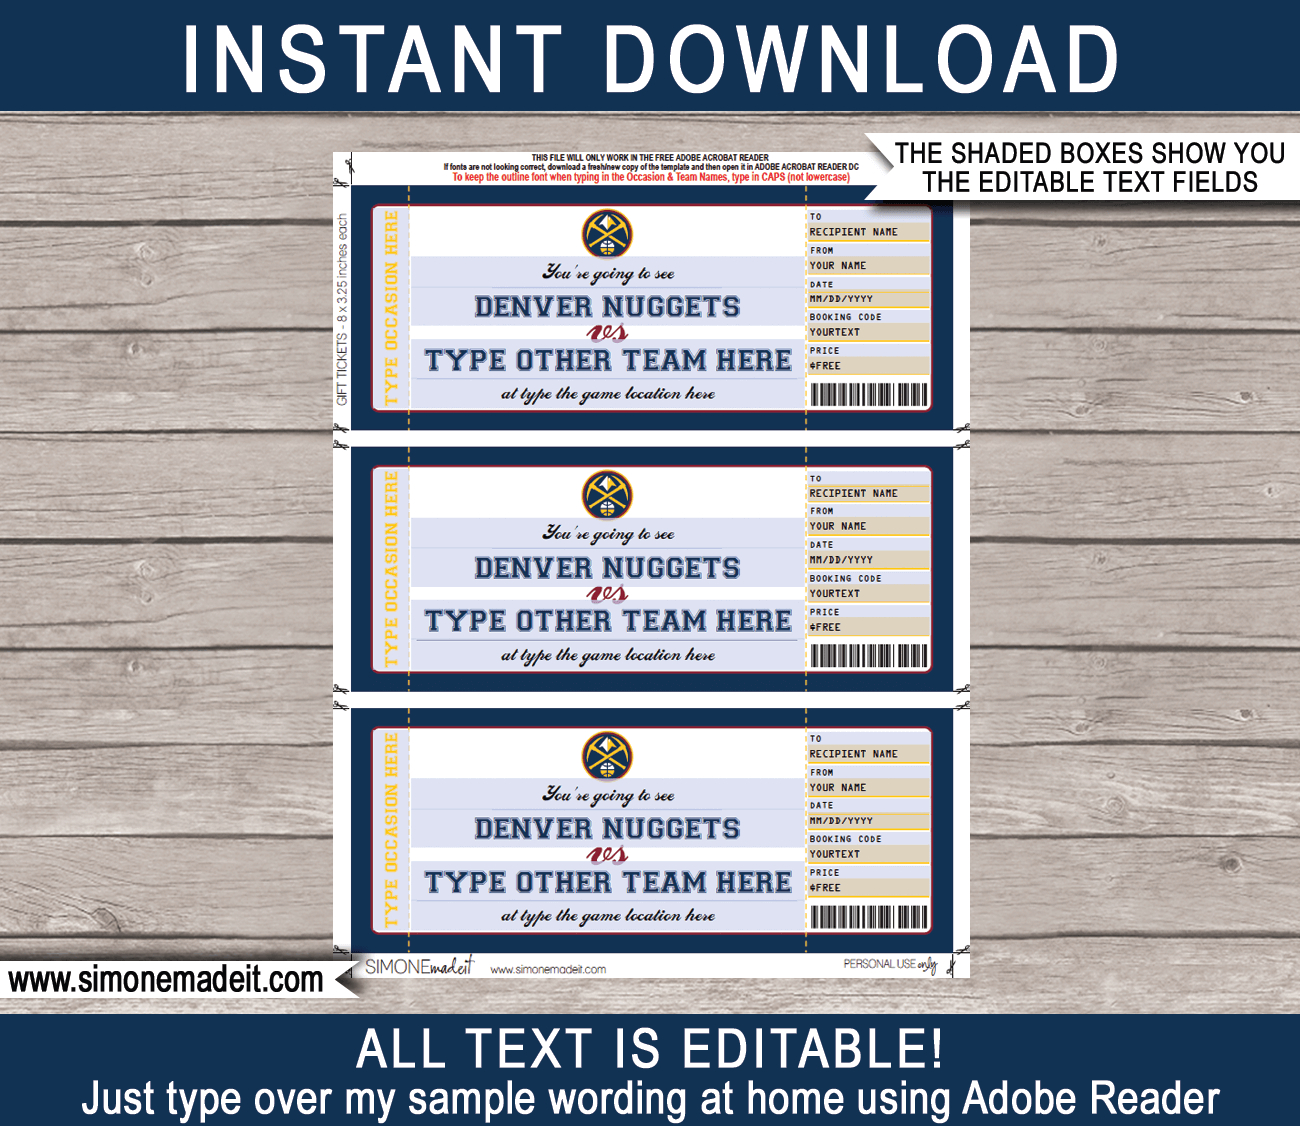 Denver Nuggets Game Ticket Gift Voucher Printable Intended For Basketball Gift Certificate Templates